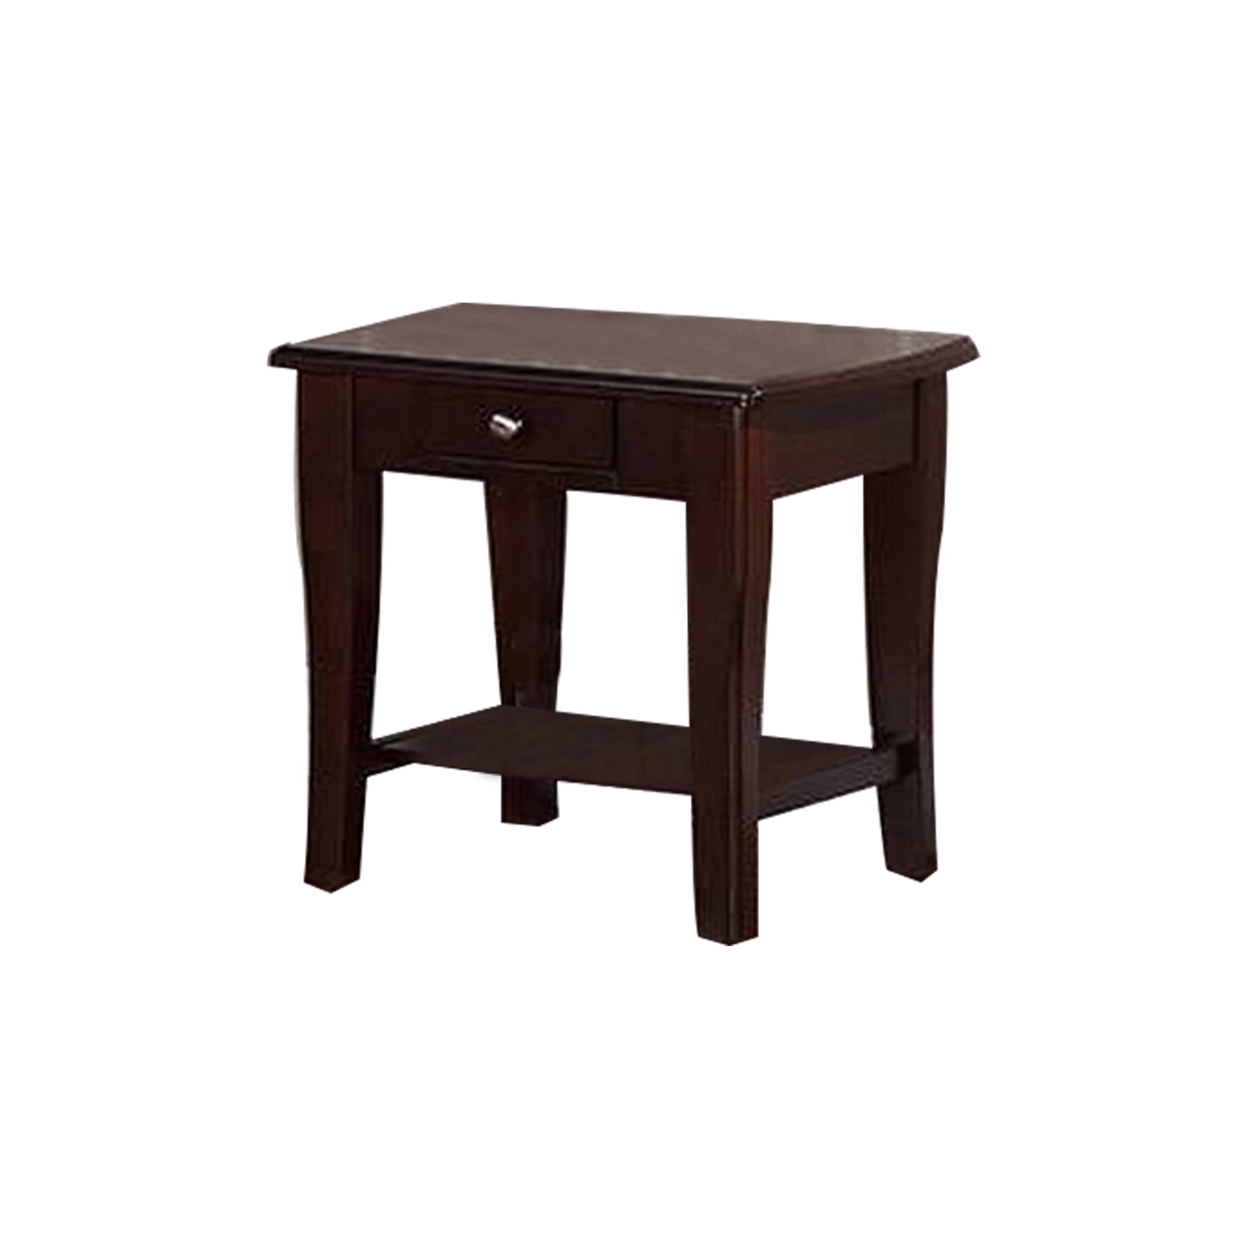 Jett 24 Inch Wood End Table With 1 Drawer, Bottom Shelf, Cherry Brown